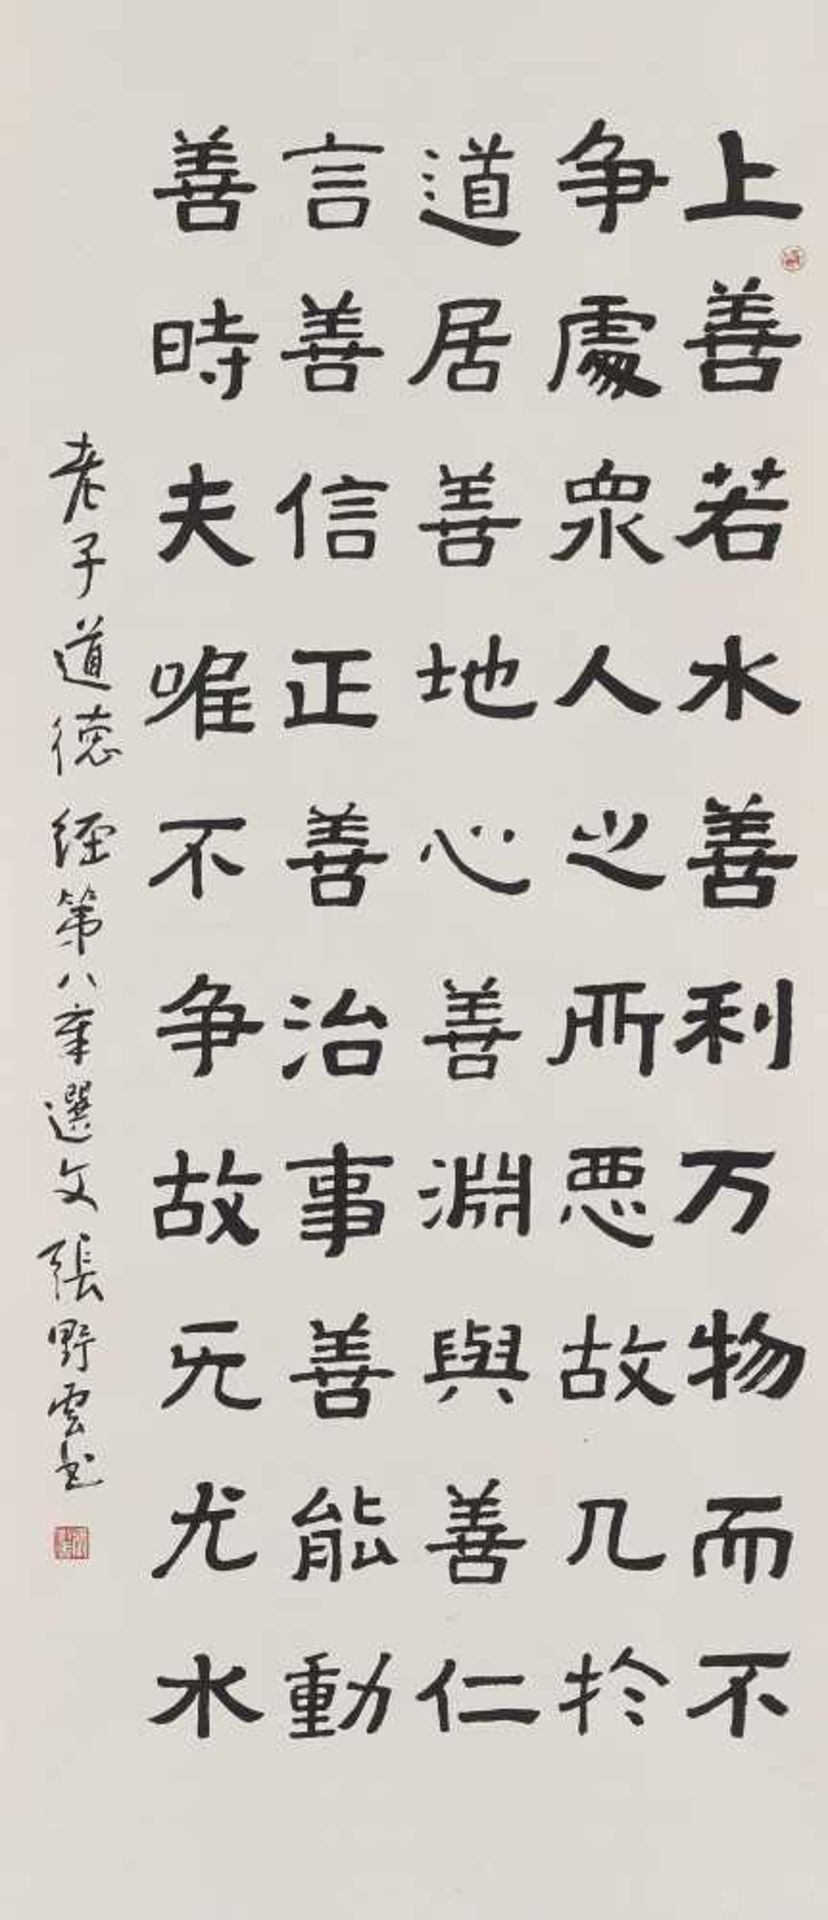 TWO CALLIGRAPHIES: DAODEJING AND LÜSHI CHUNQIU. China. 20th c. Ink on paper. Mounted as hanging